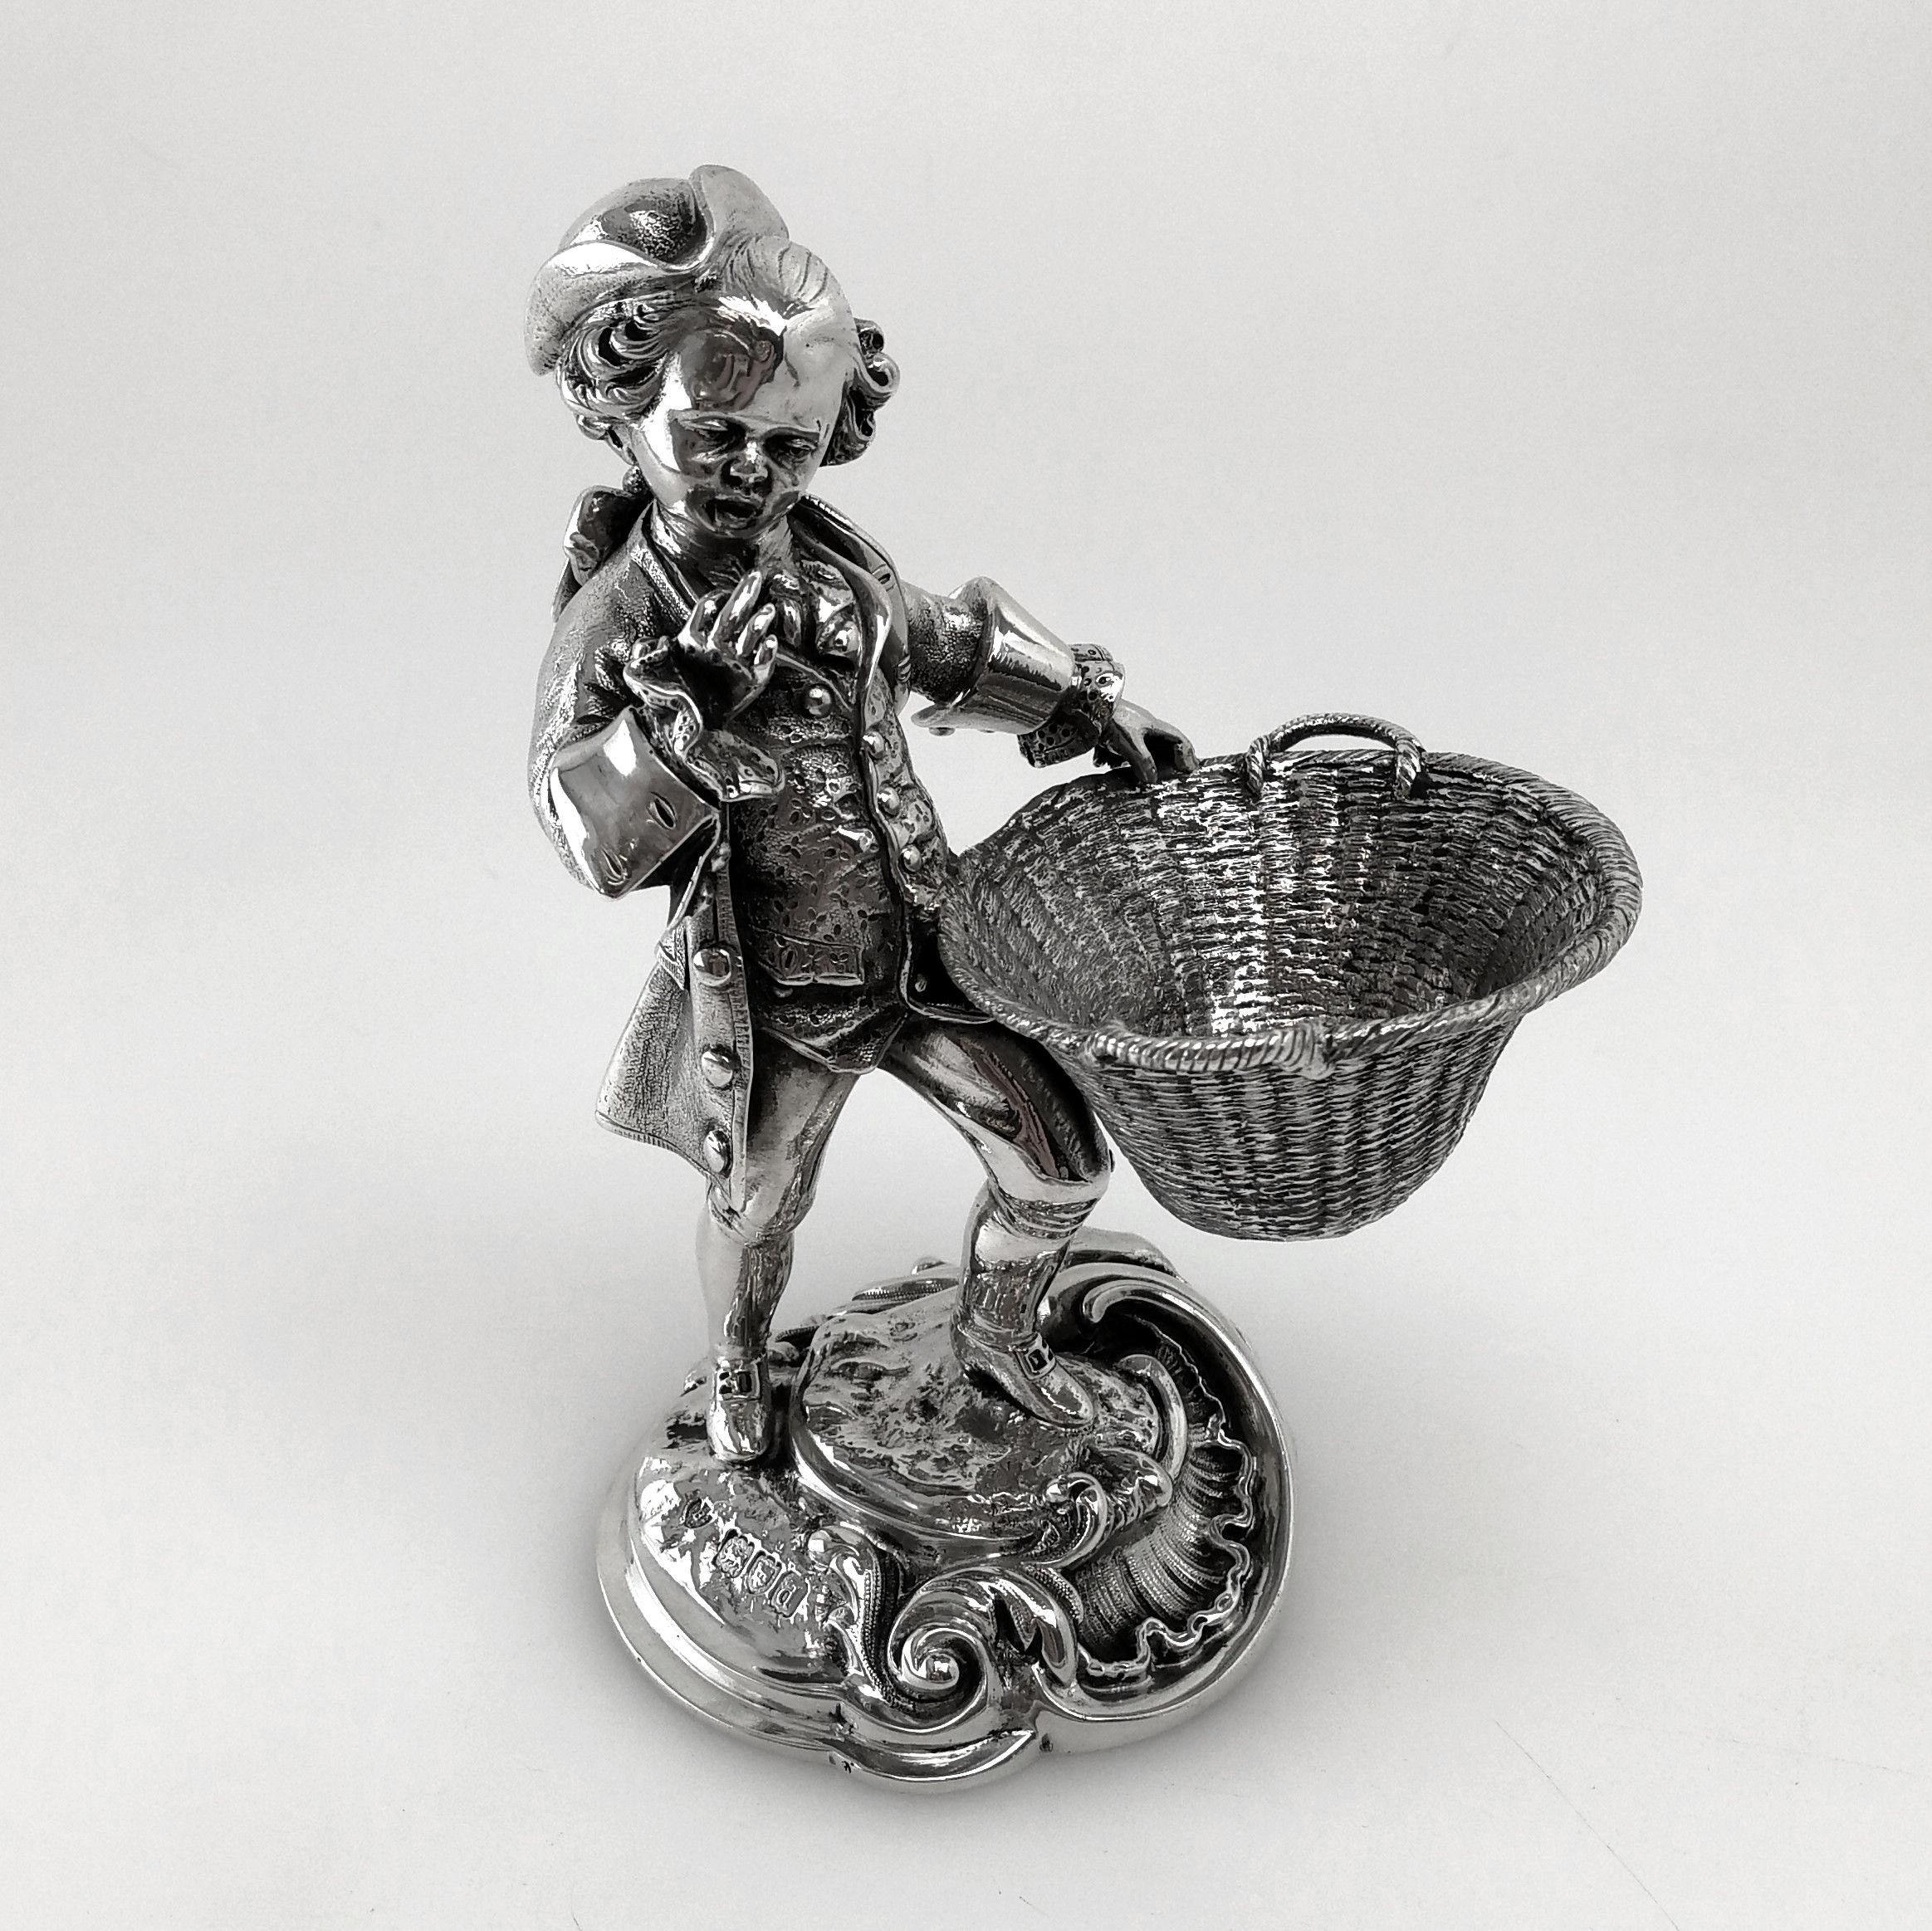 A pair of magnificent cast solid silver Antique Victorian Table Salts / Salt Pinch Pots. The Figural Salts are cast in a pair of Male & Female Figures in period dress each holing a wide oval woven basket in their hands. The man is dressed in a Tri -